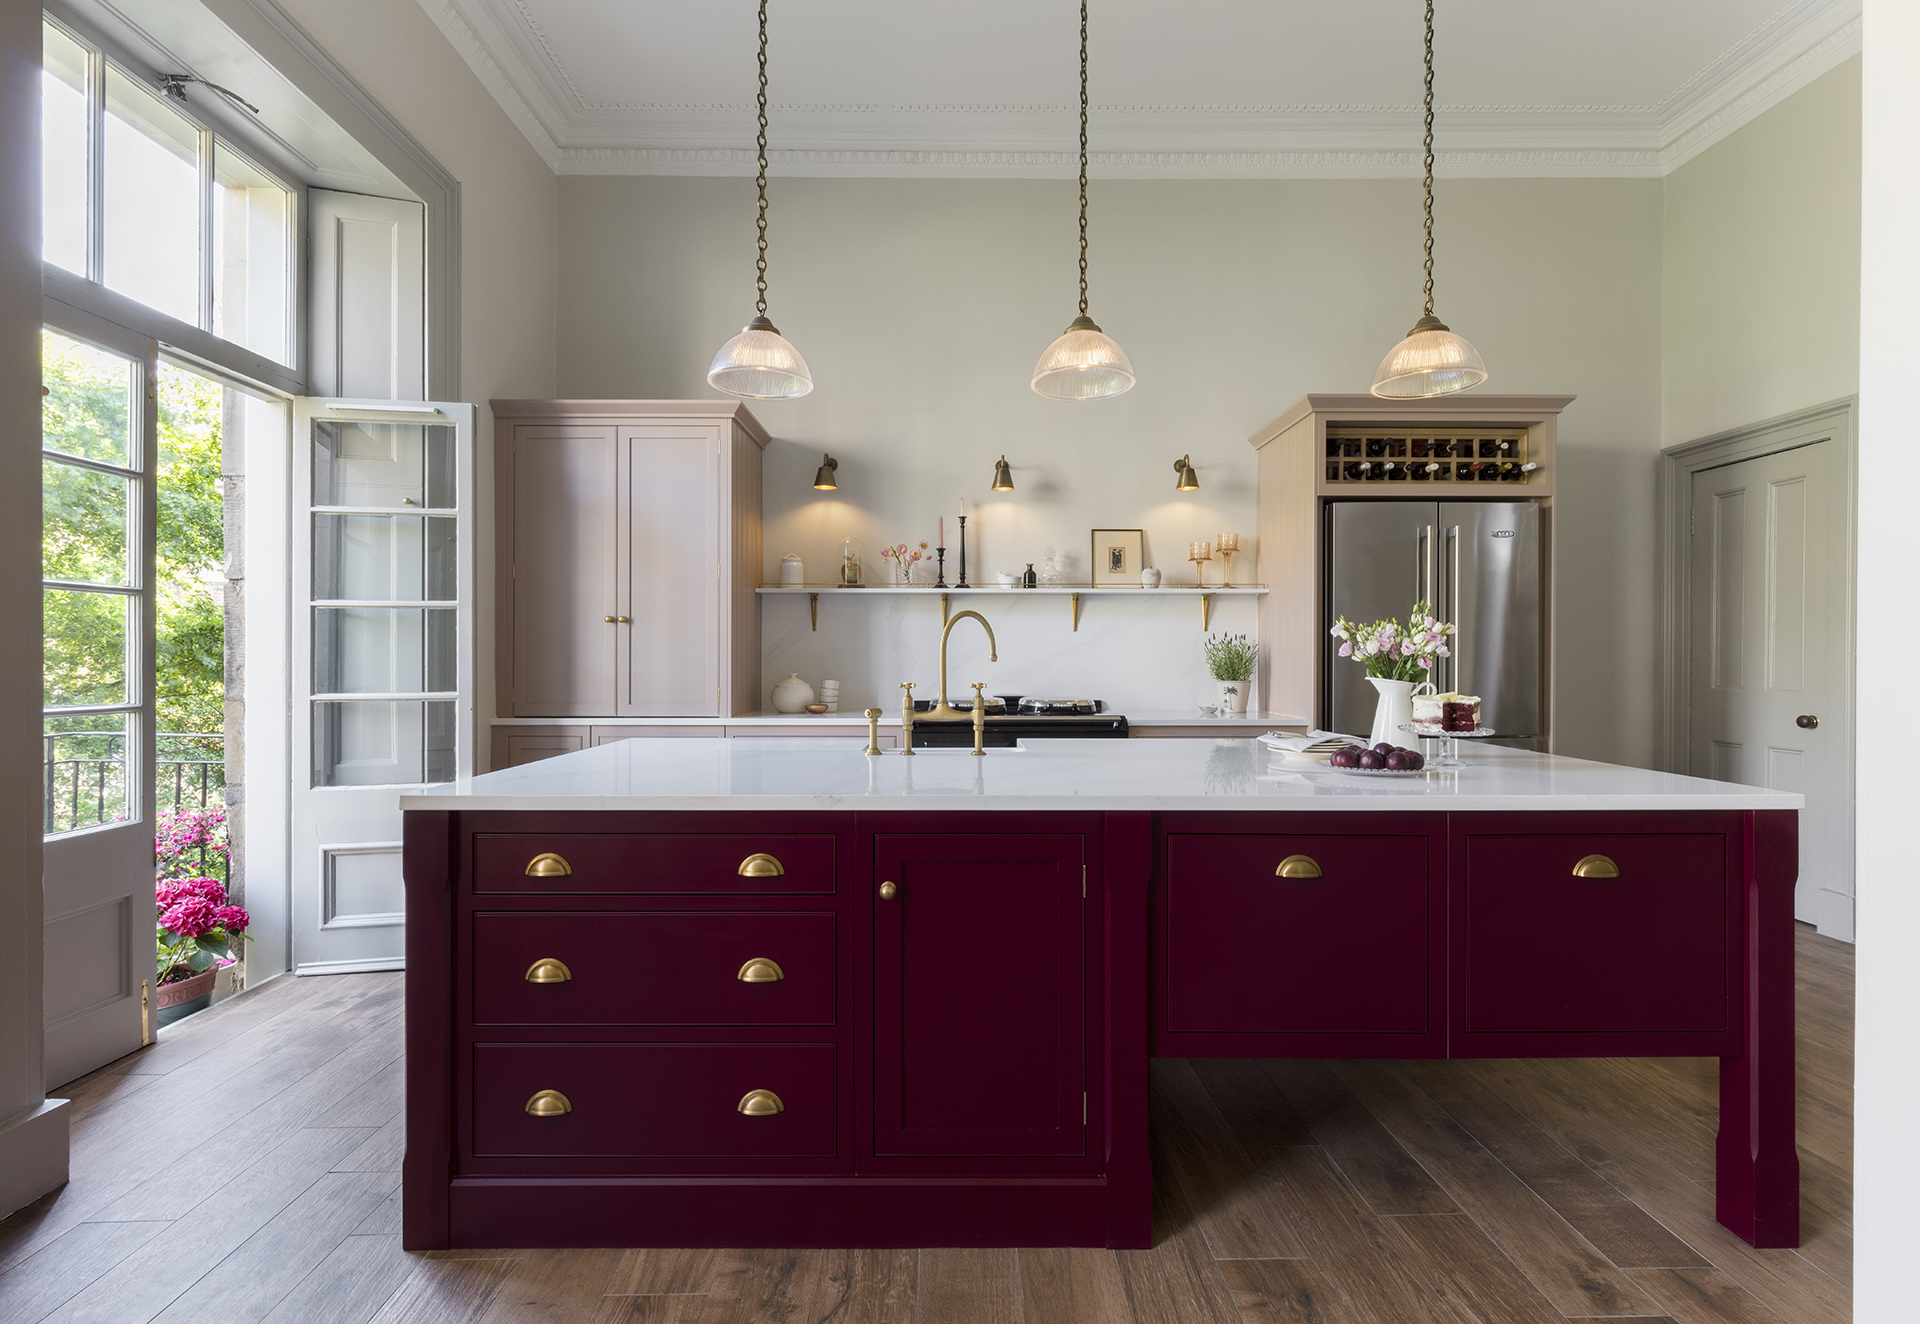 Is it better to have doors or drawers in a kitchen? The experts